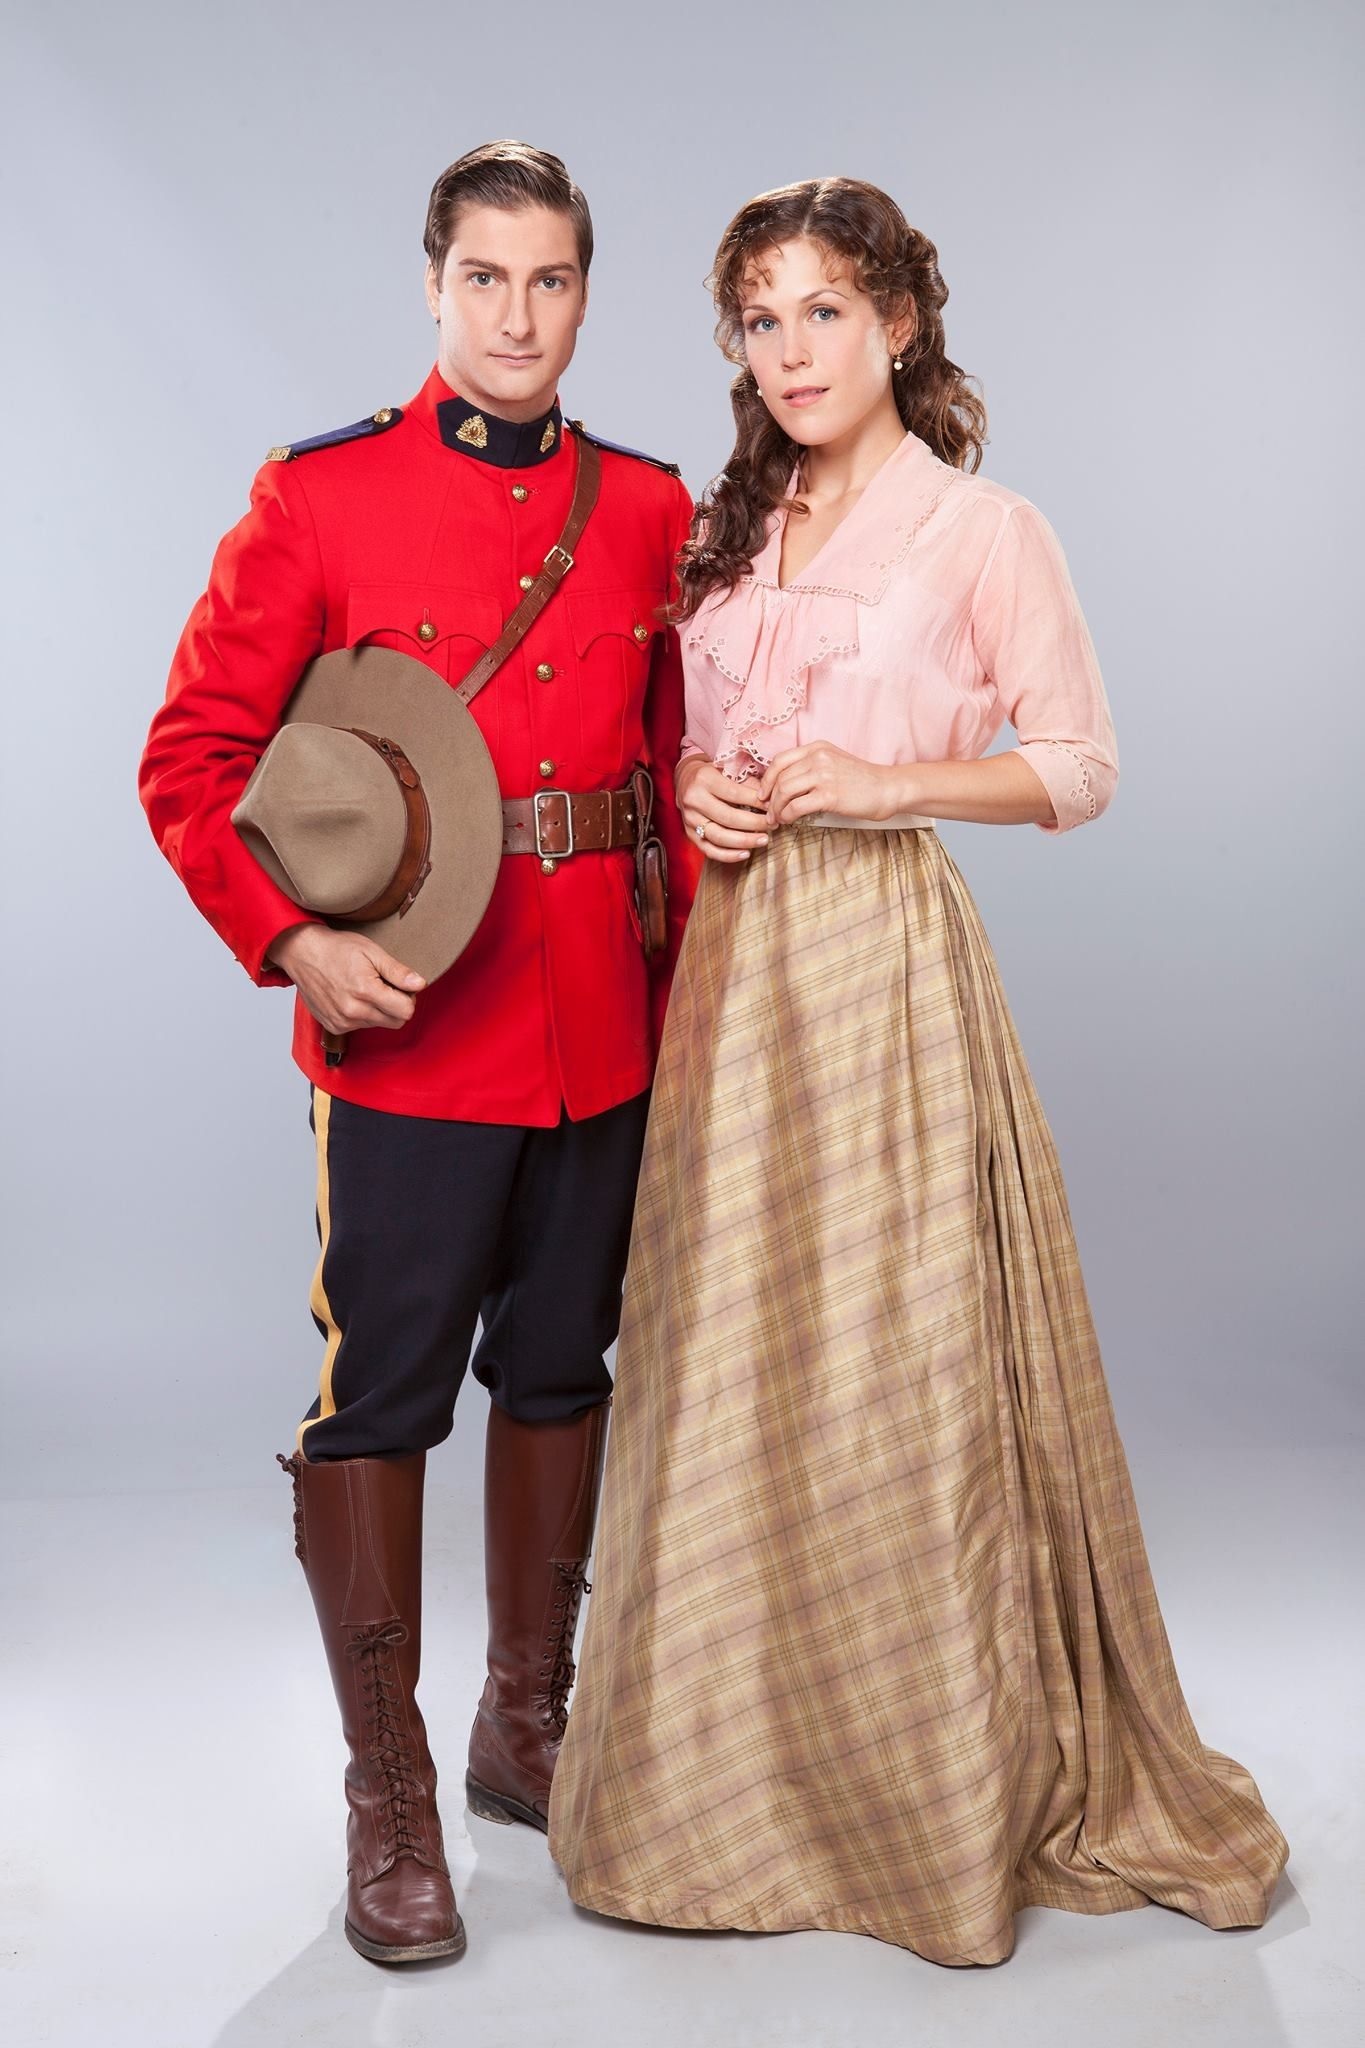 Erin Krakow with Daniel Lissing portraying the characters of Elizabeth Thatcher and Jack Thatcher 